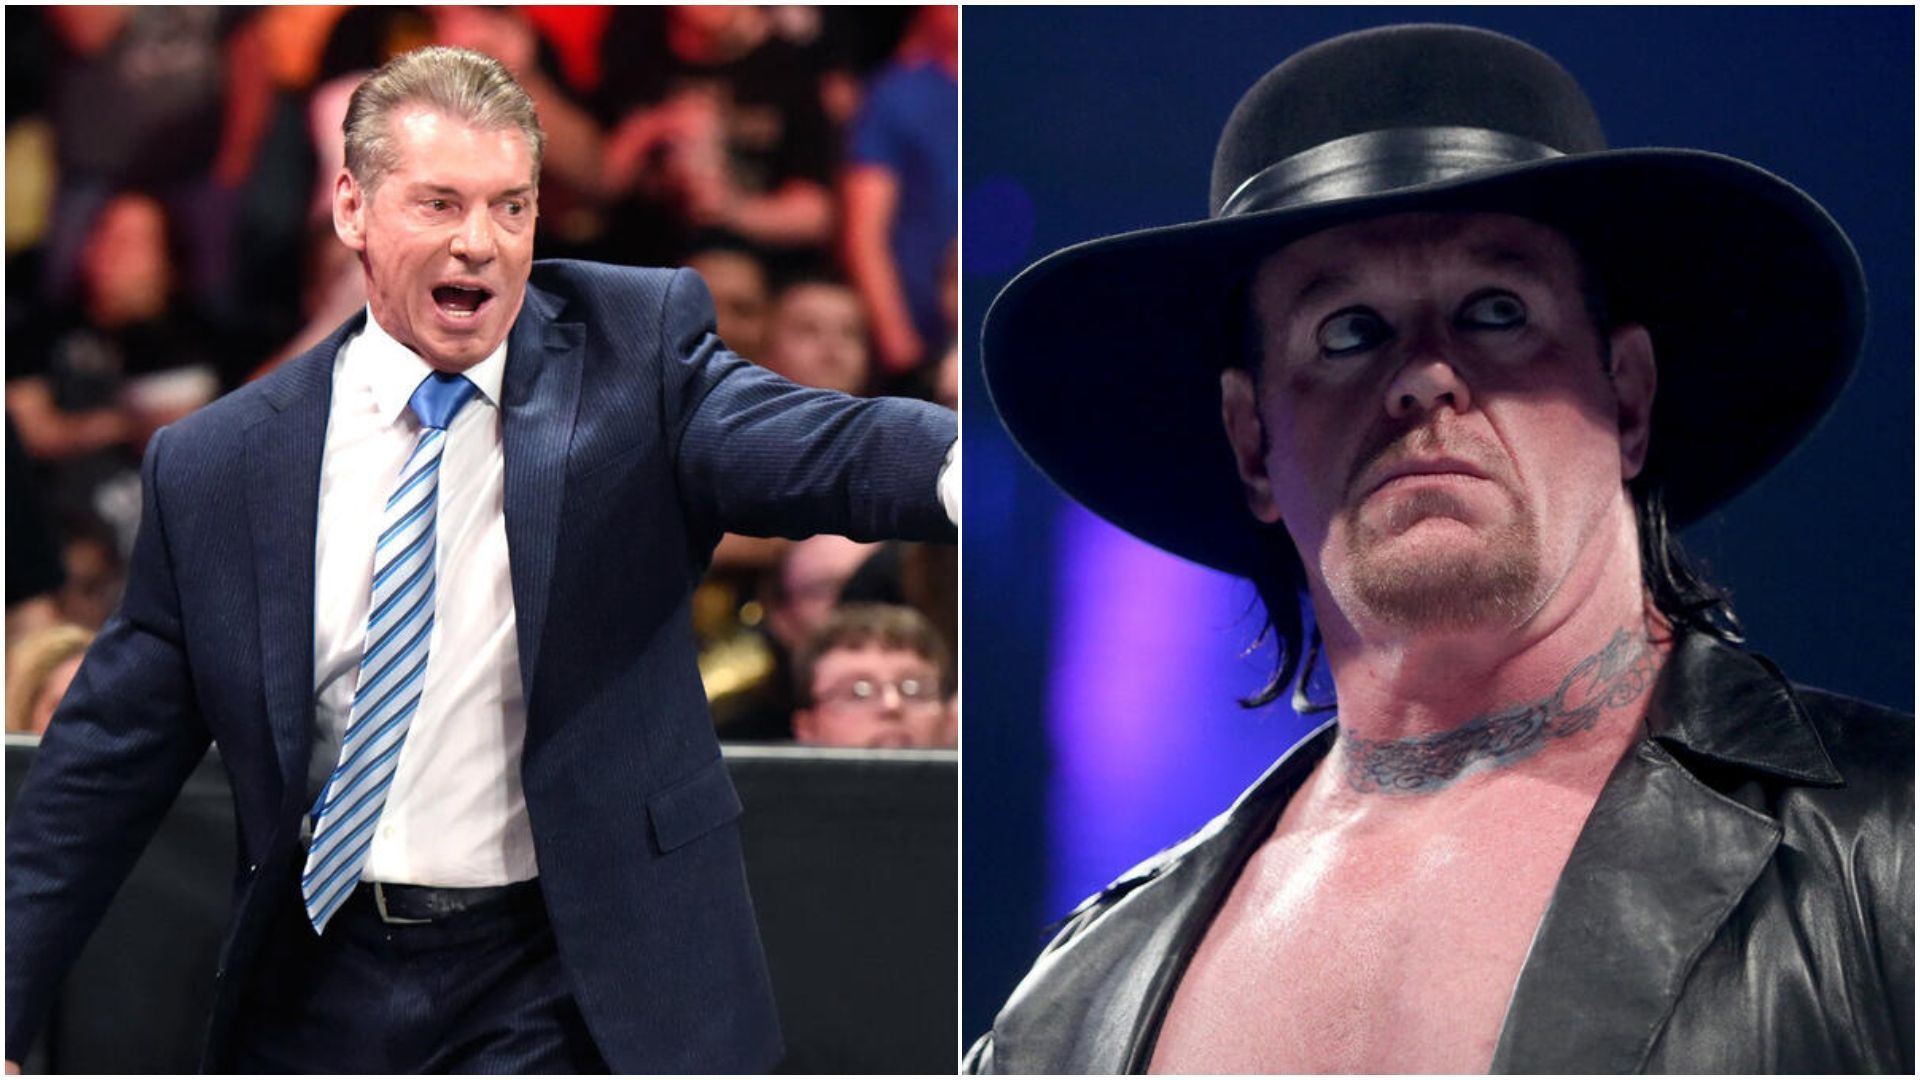 Vince McMahon (left), and The Undertaker (right).